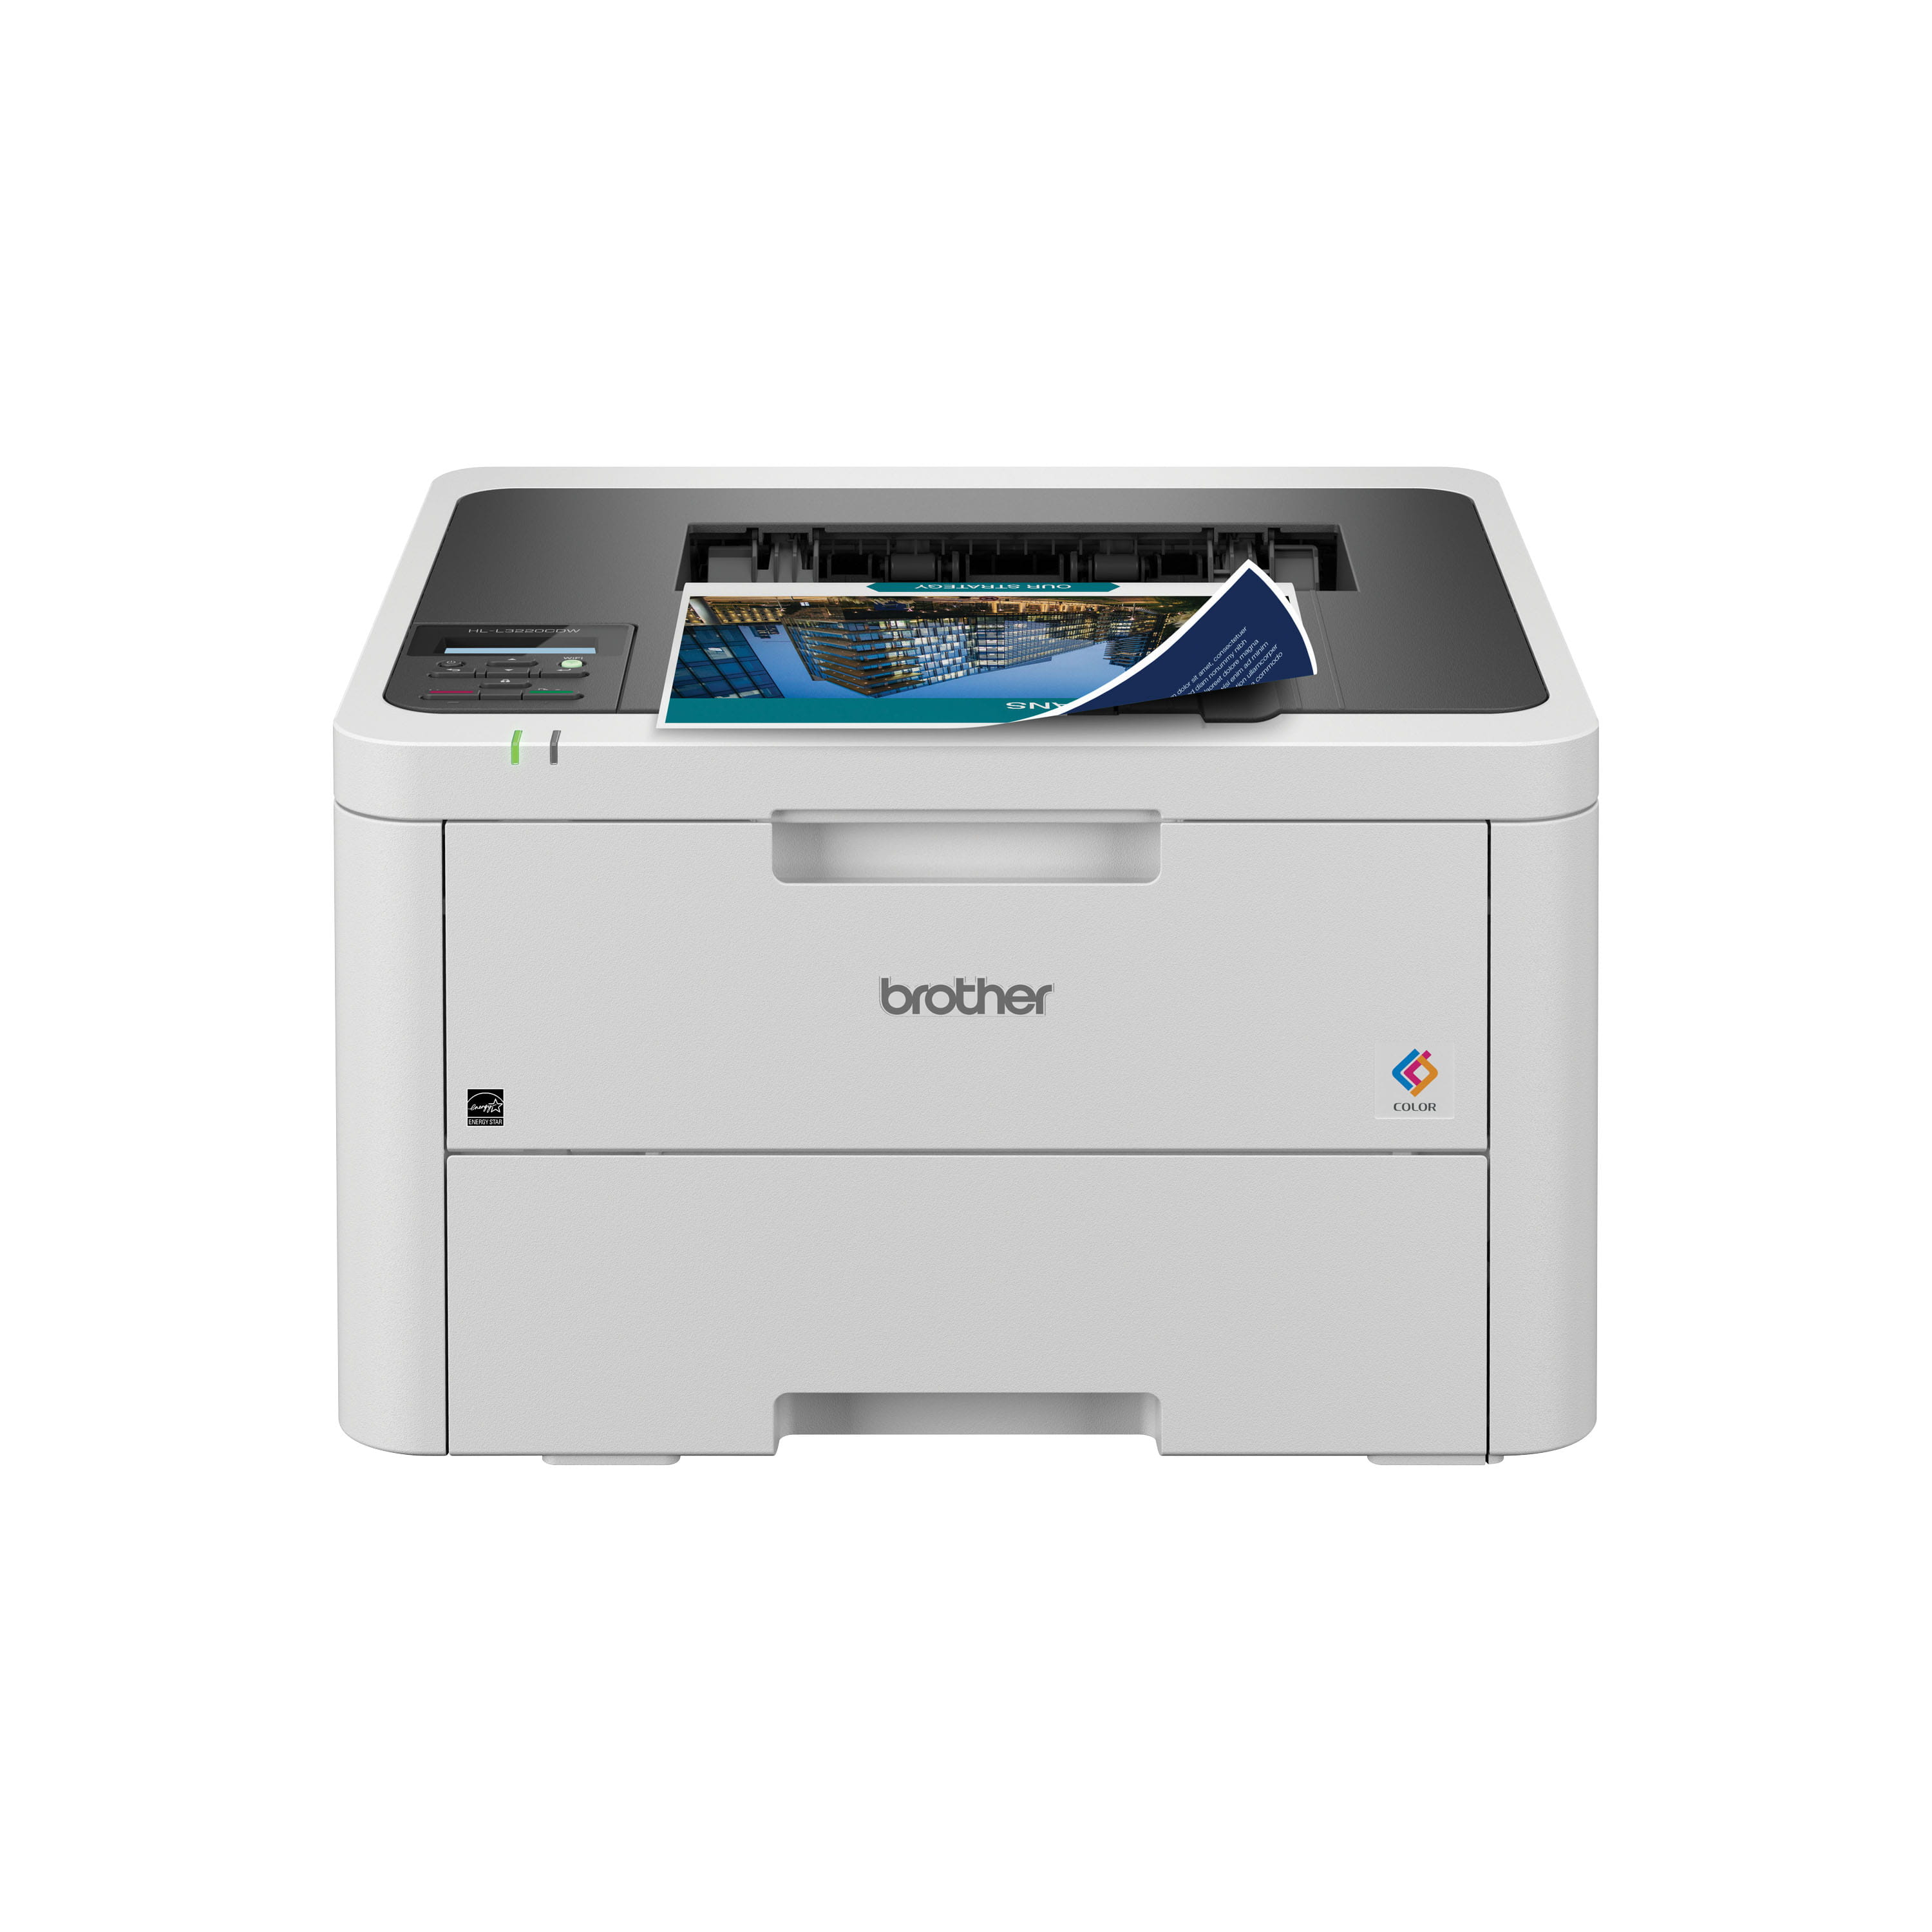 Brother MFC-L3750CDW Compact Digital Color All-in-One Printer